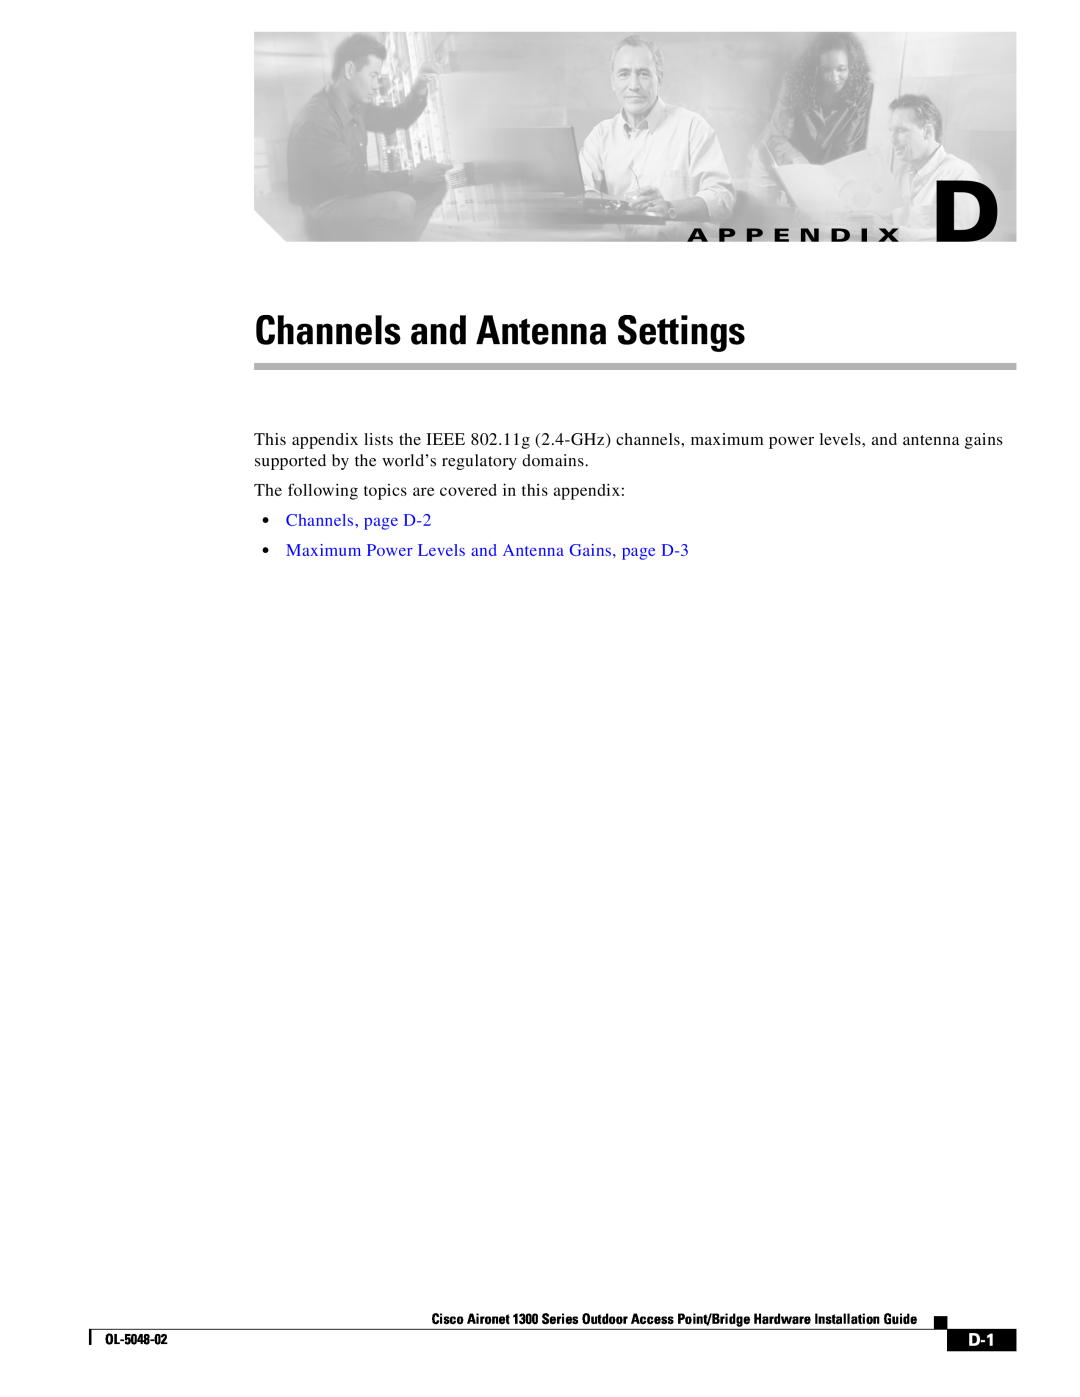 Cisco Systems 1300 Series manual Channels and Antenna Settings, A P P E N D I X D, OL-5048-02 